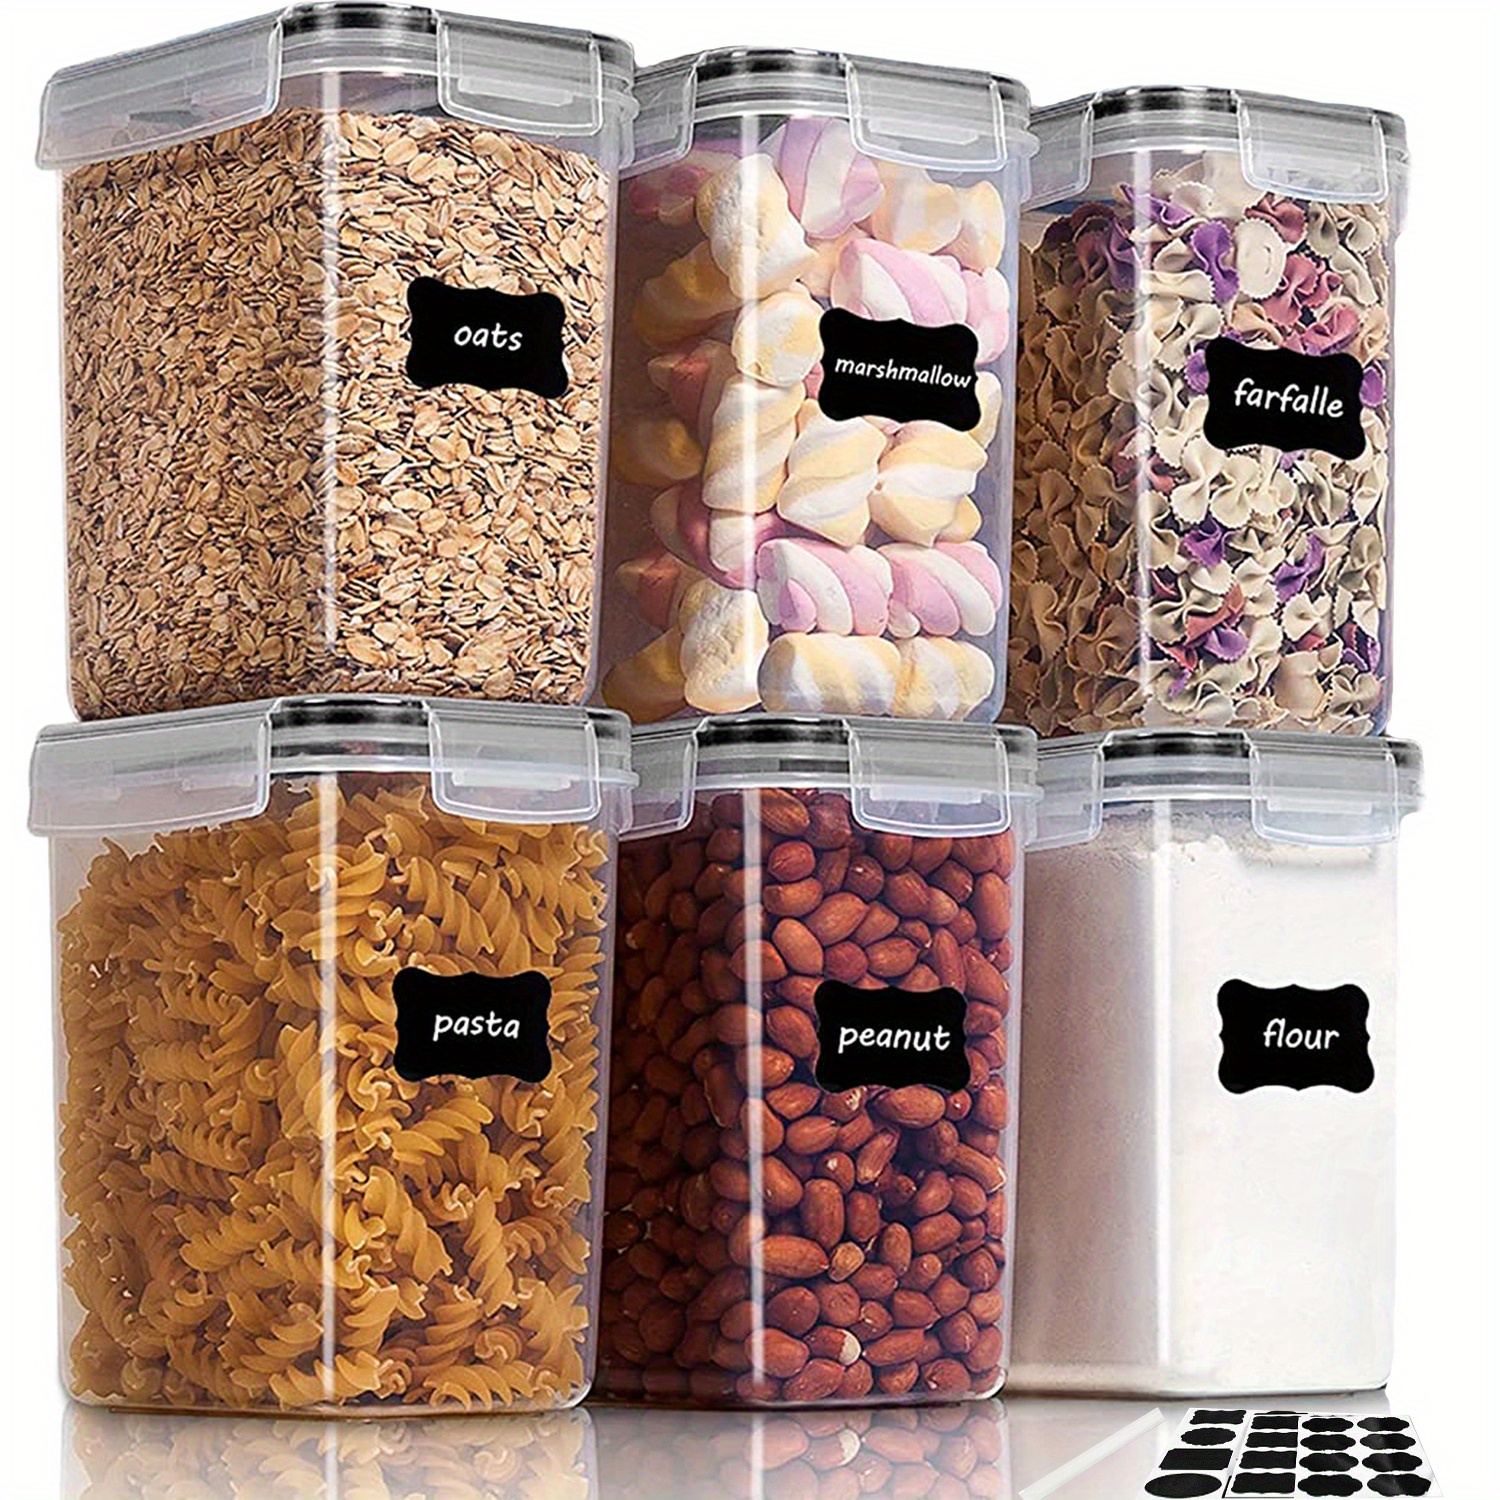 2/6pcs Cereal Storage Container Set 1.6L/ 54oz, For  Cereal,Flour,Sugar,Baking Supplies, BPA Free Plastic Airtight Food Storage  Containers, With Labels